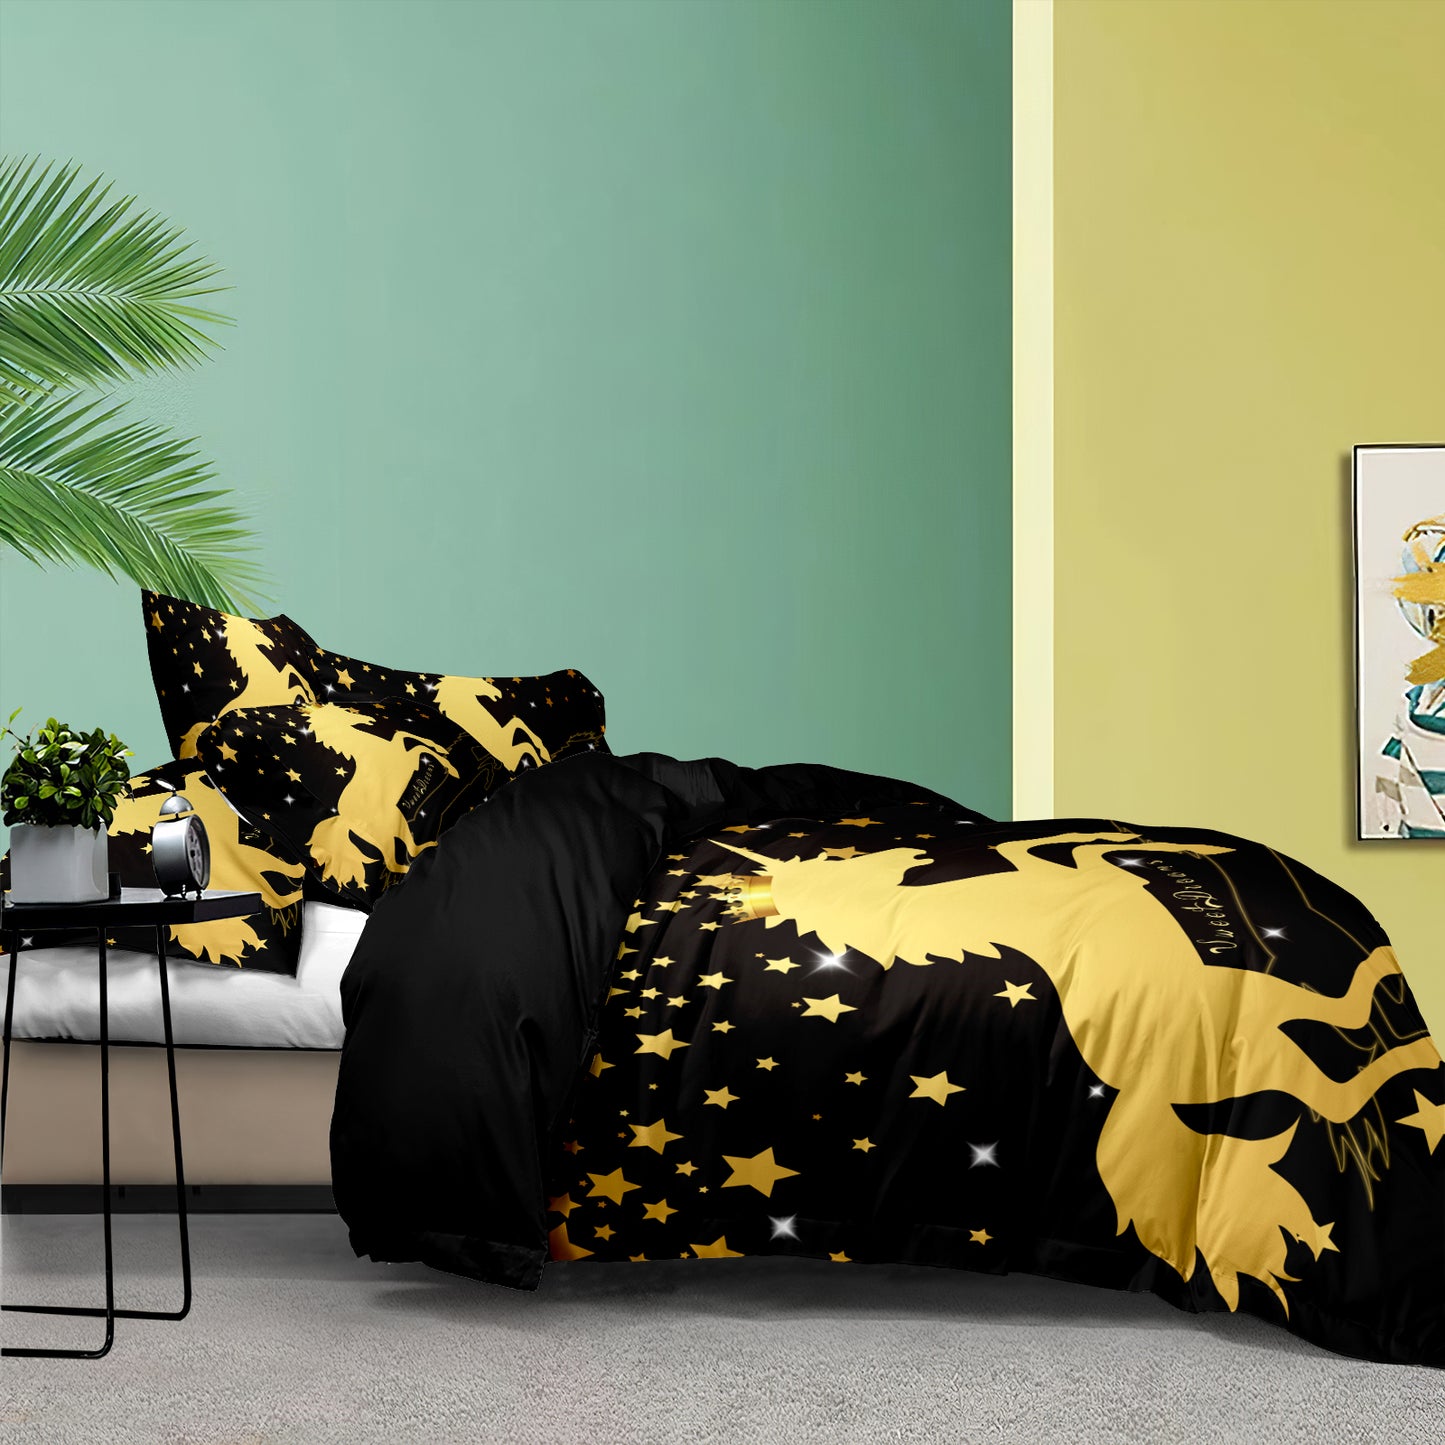 Golden Horse Duvet Cover with 2 Pillow cases